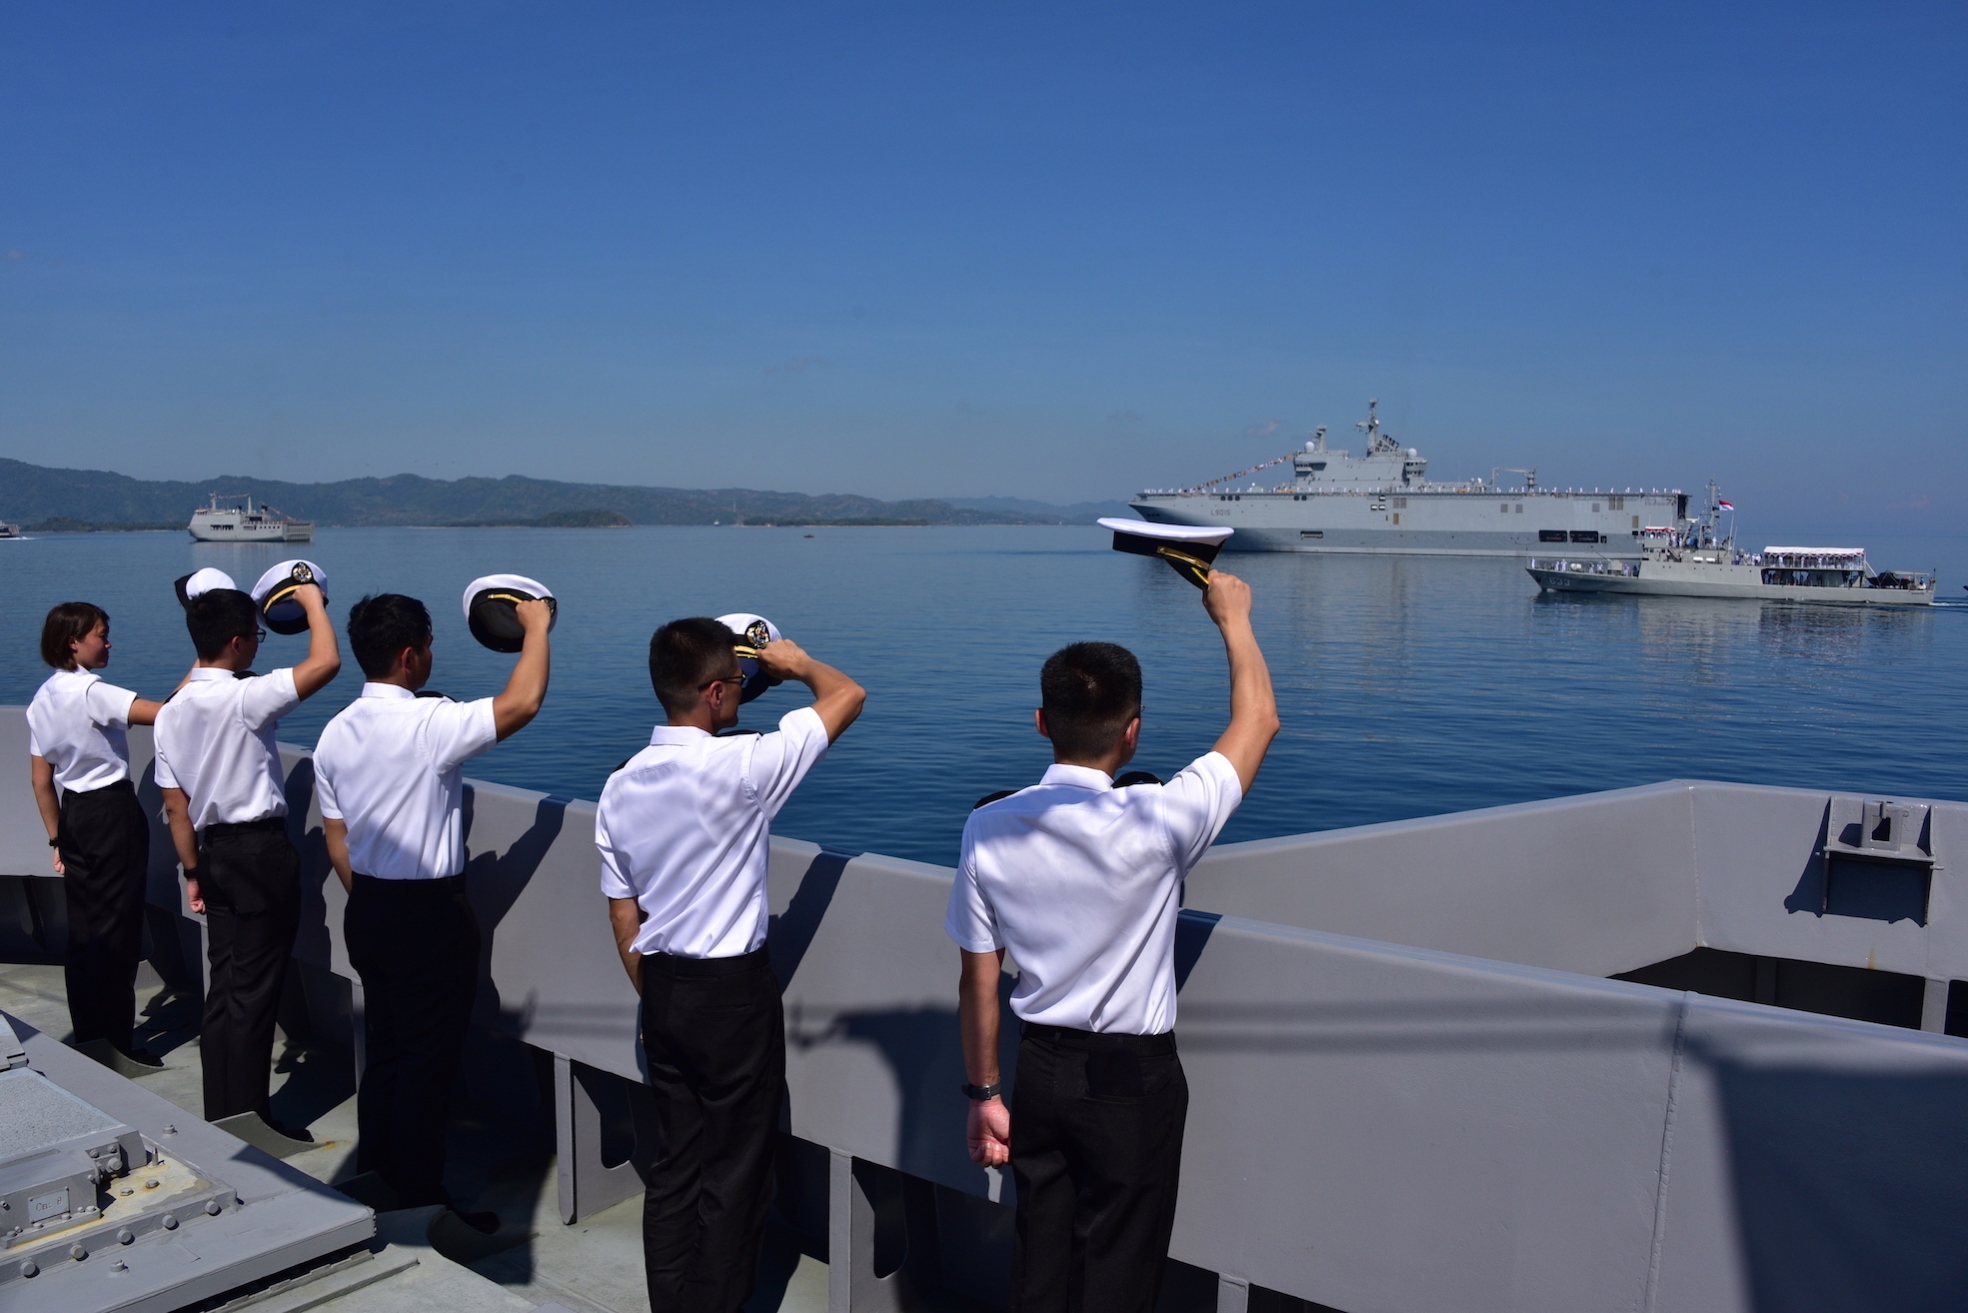 Crew from RSS Formidable lining up on deck as Indonesian Navy (TNI AL) Chief of Staff Admiral Ade Supandi conducts the International Fleet Review on board KRI Barakuda (first from right).